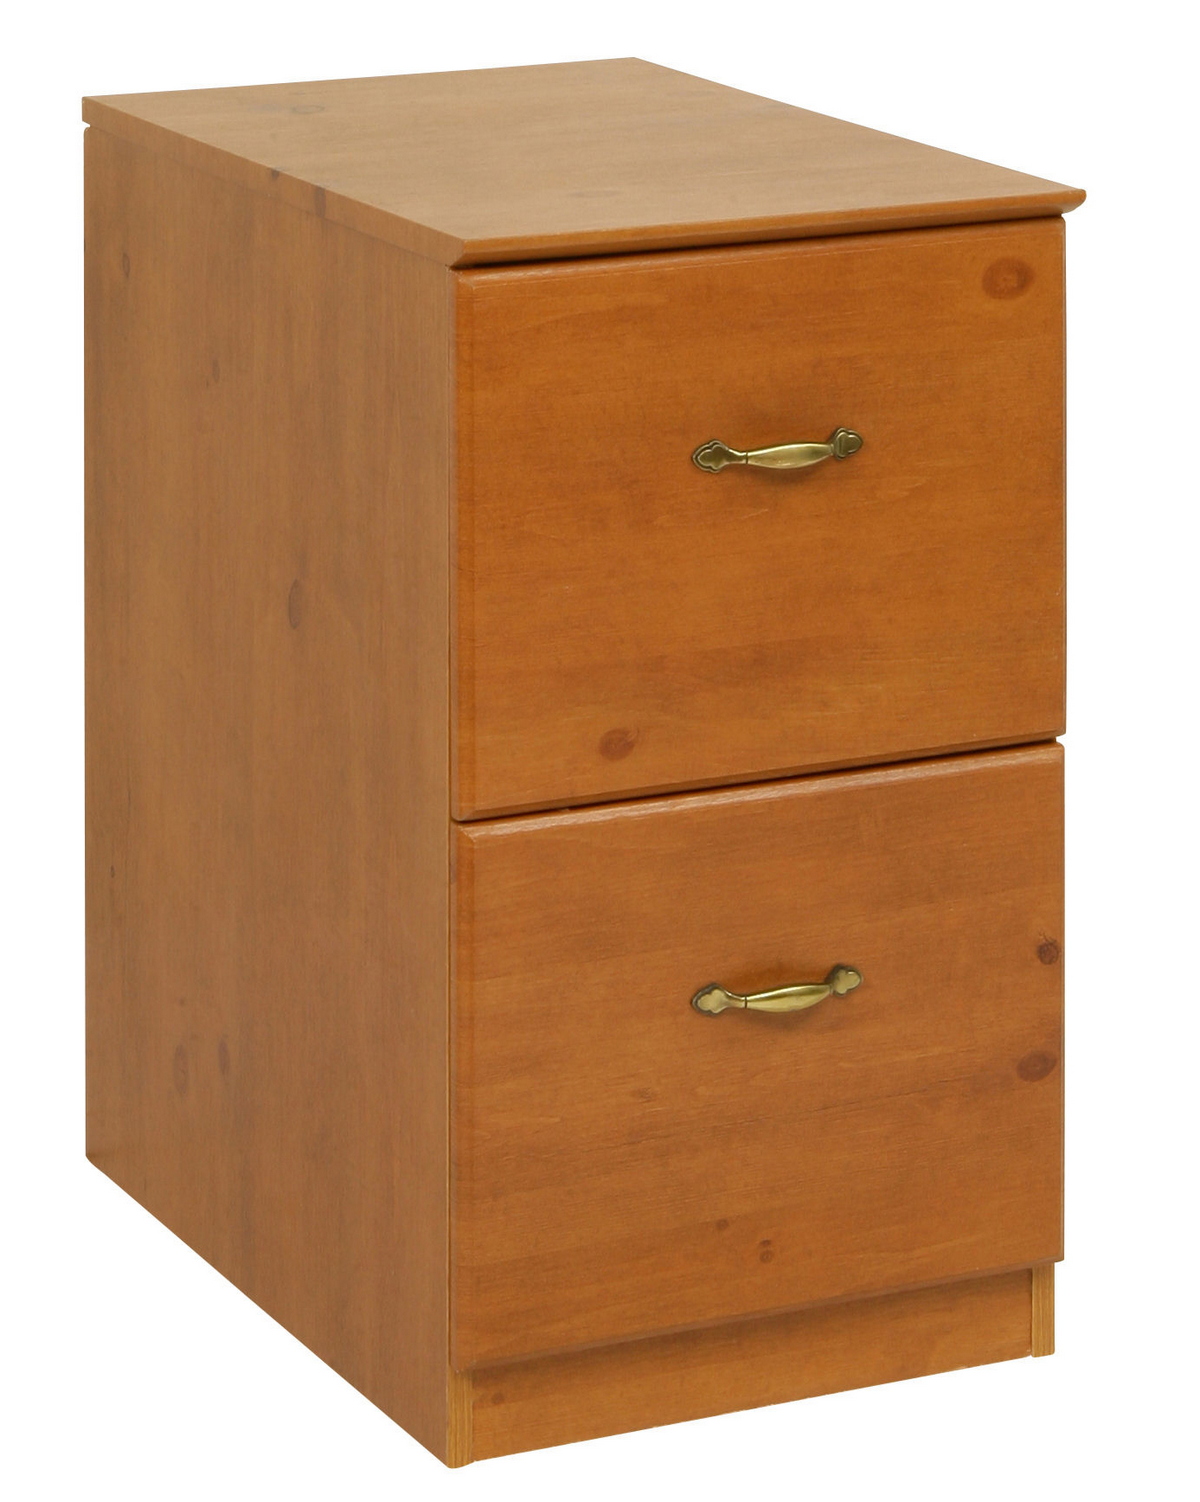 French Gardens 2 Drawer Filing Cabinet